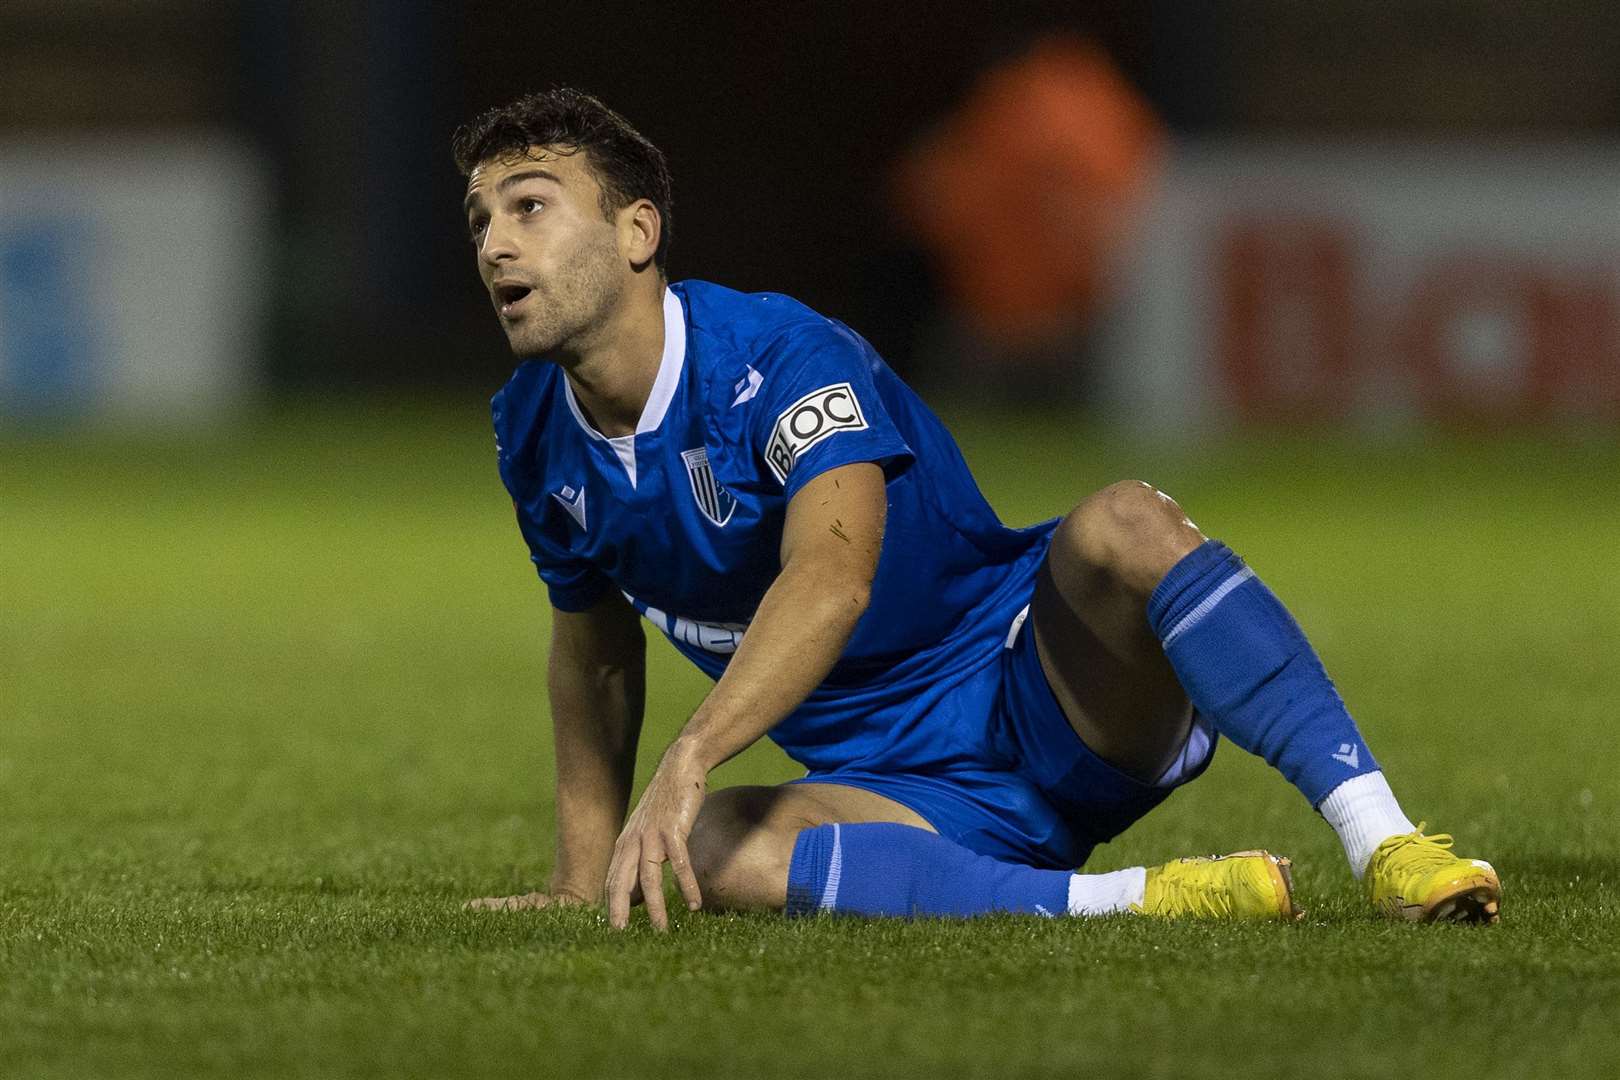 Scott Kashket scored his second goal for the Gills on Saturday Picture: KPI